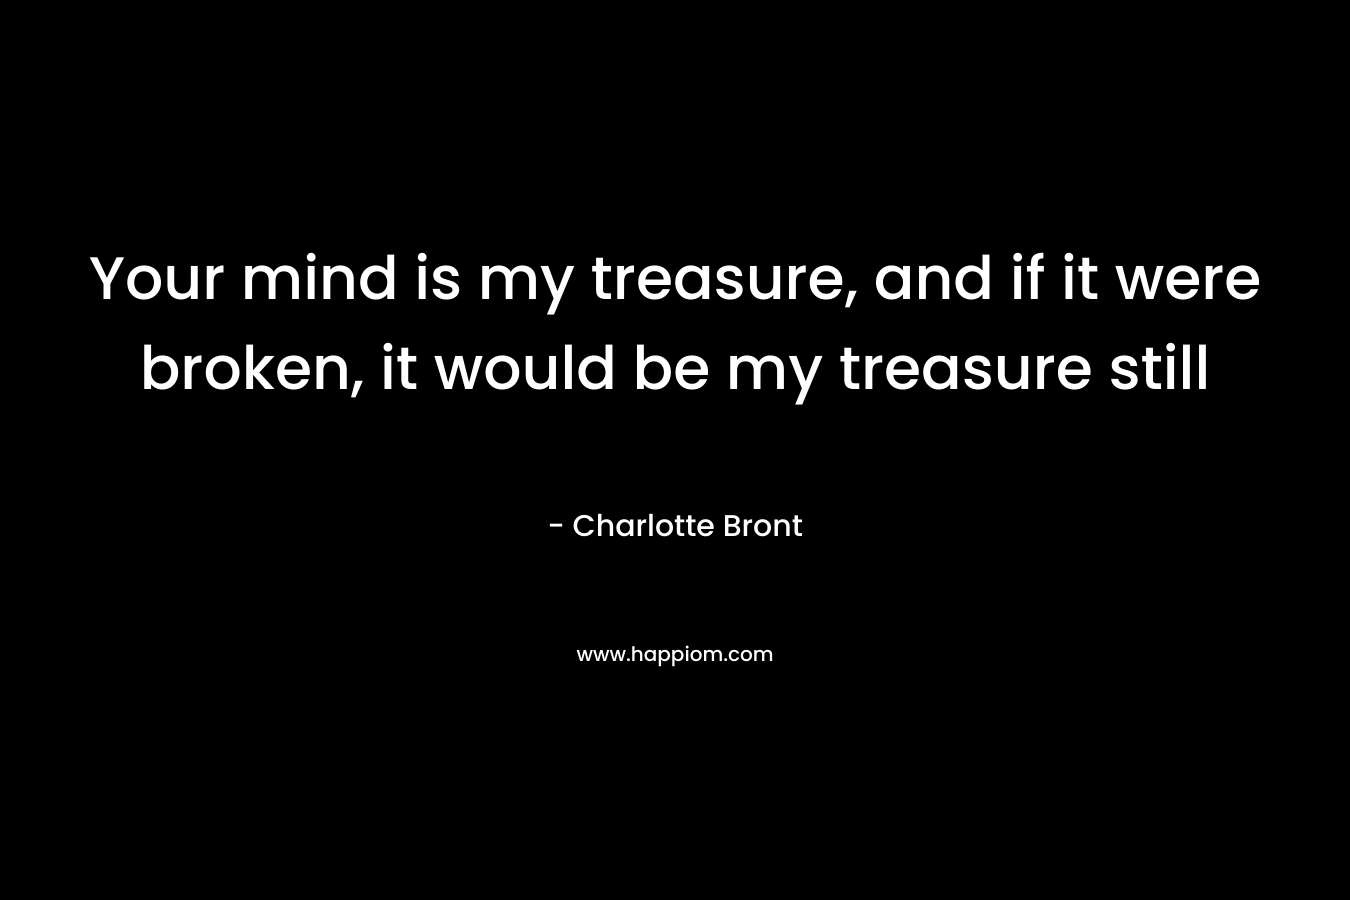 Your mind is my treasure, and if it were broken, it would be my treasure still – Charlotte Bront